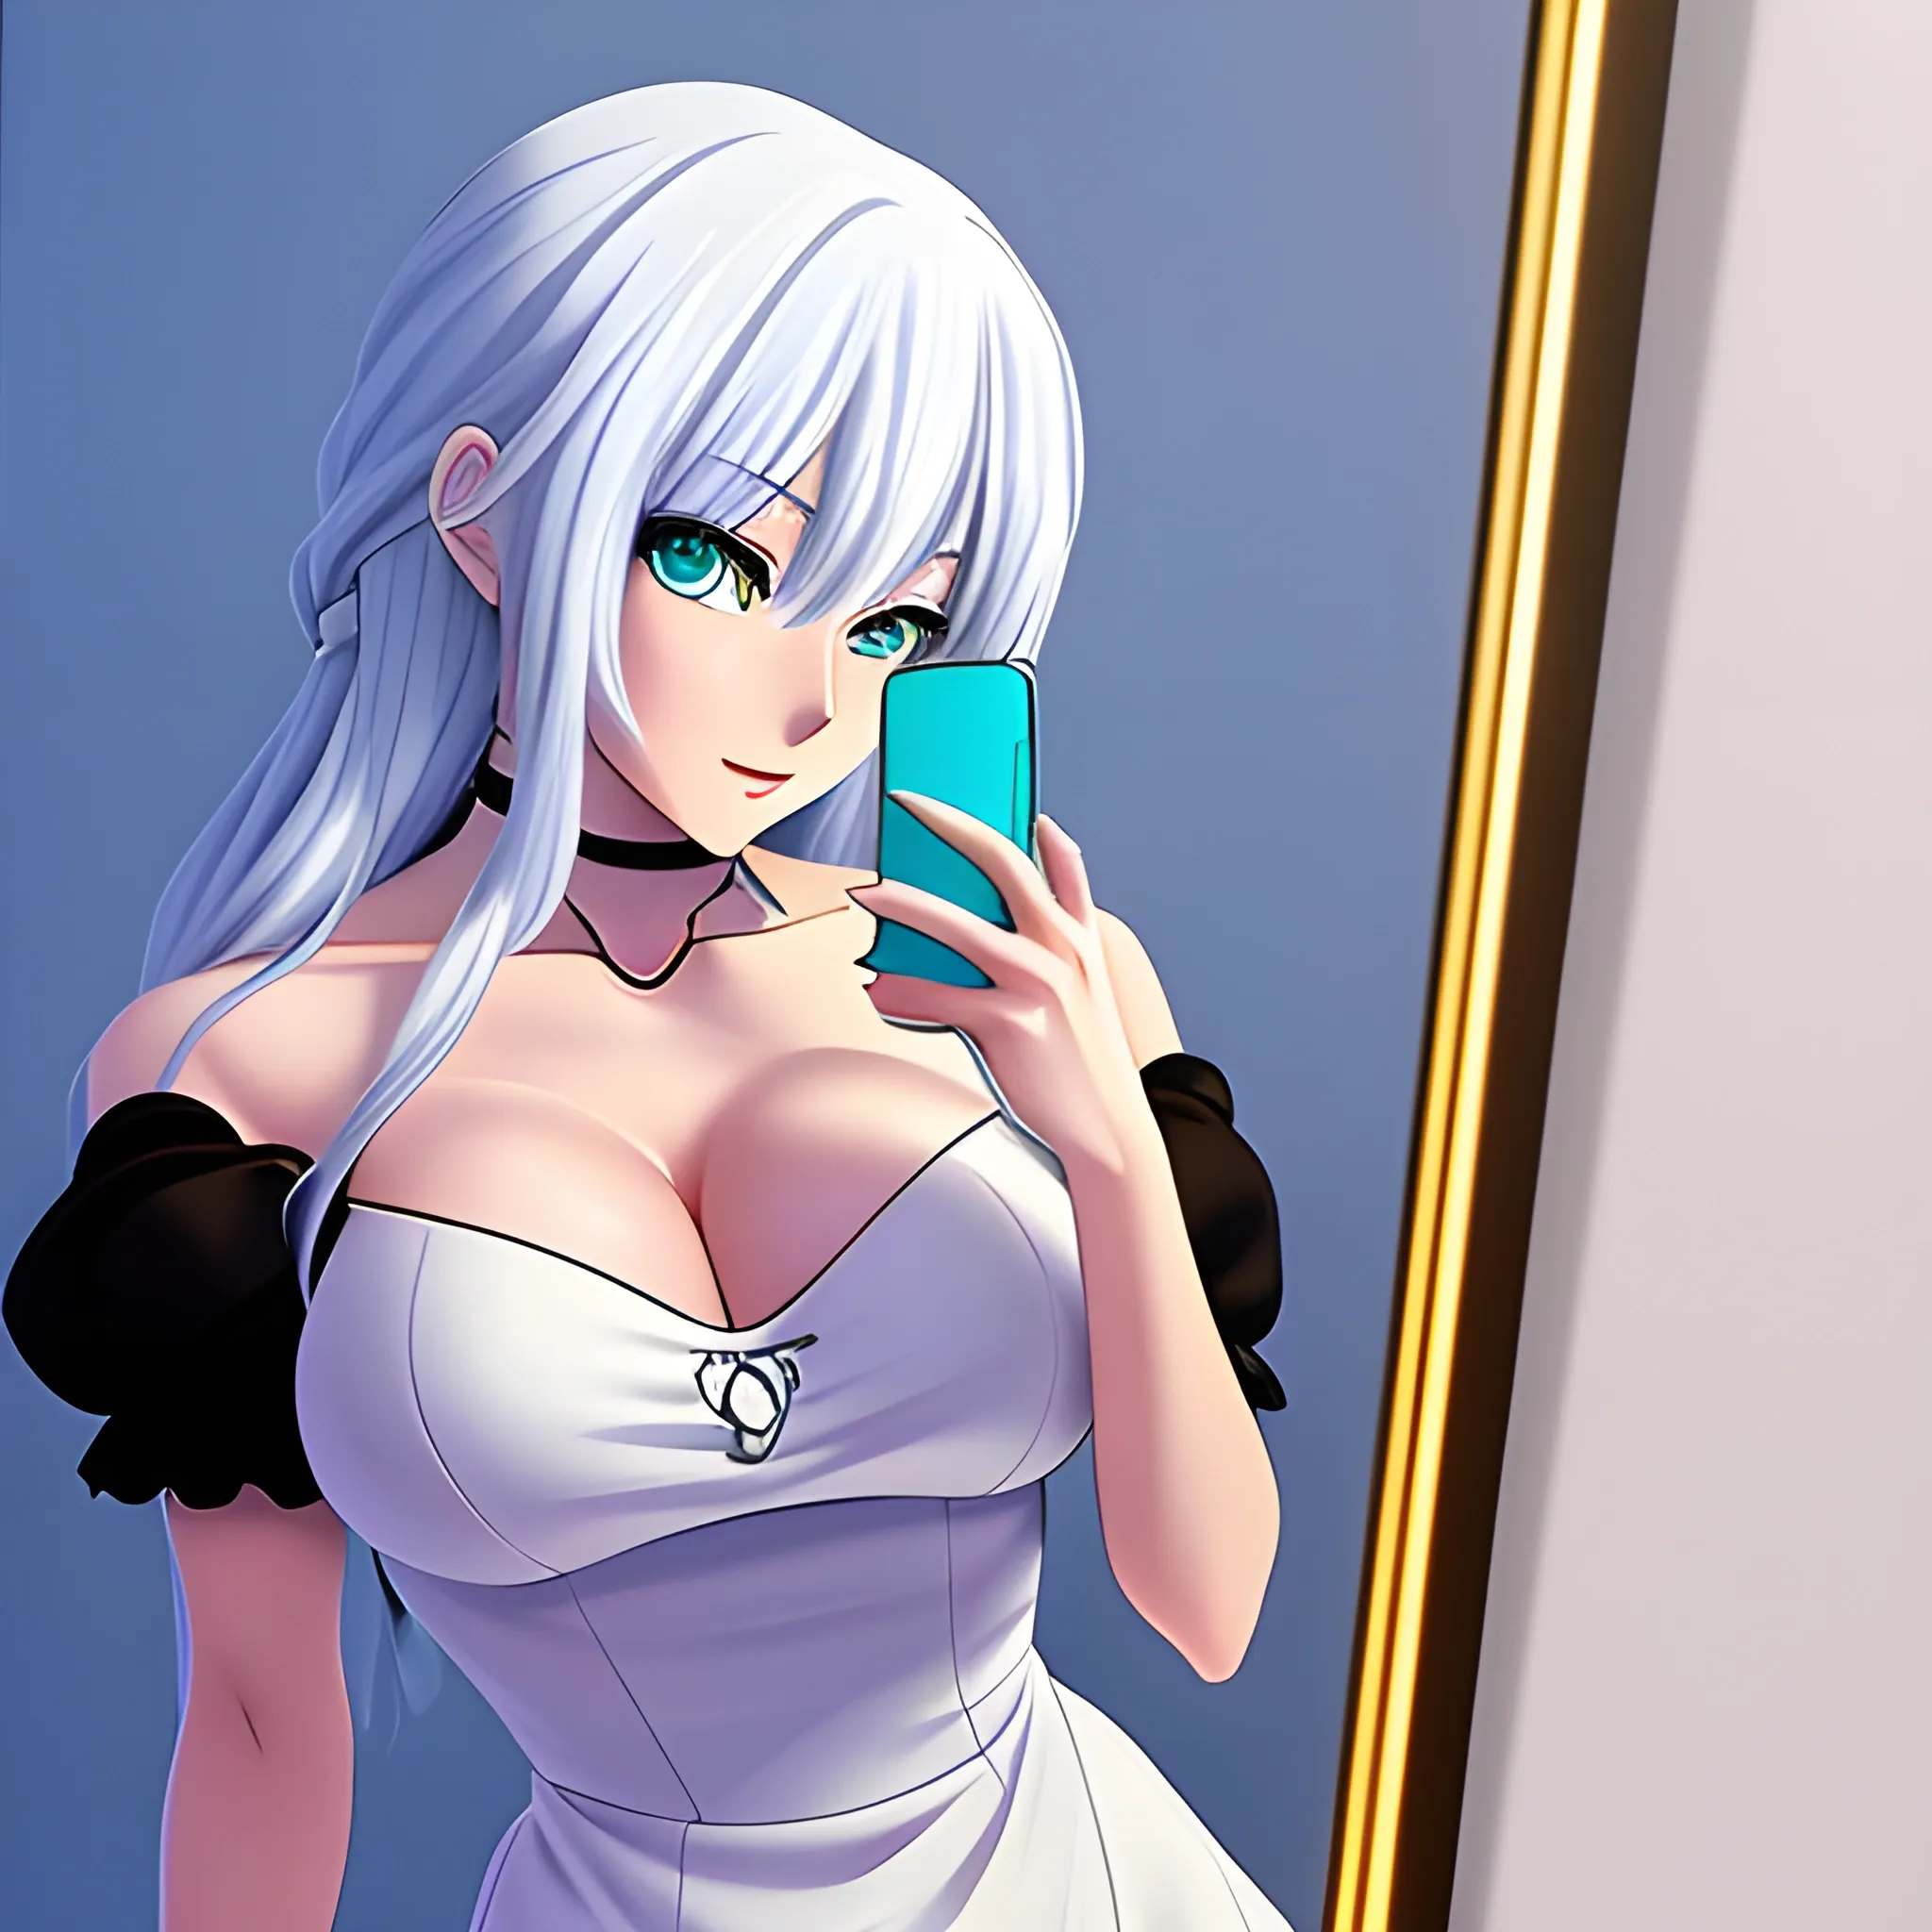 anime girl looking in the mirror